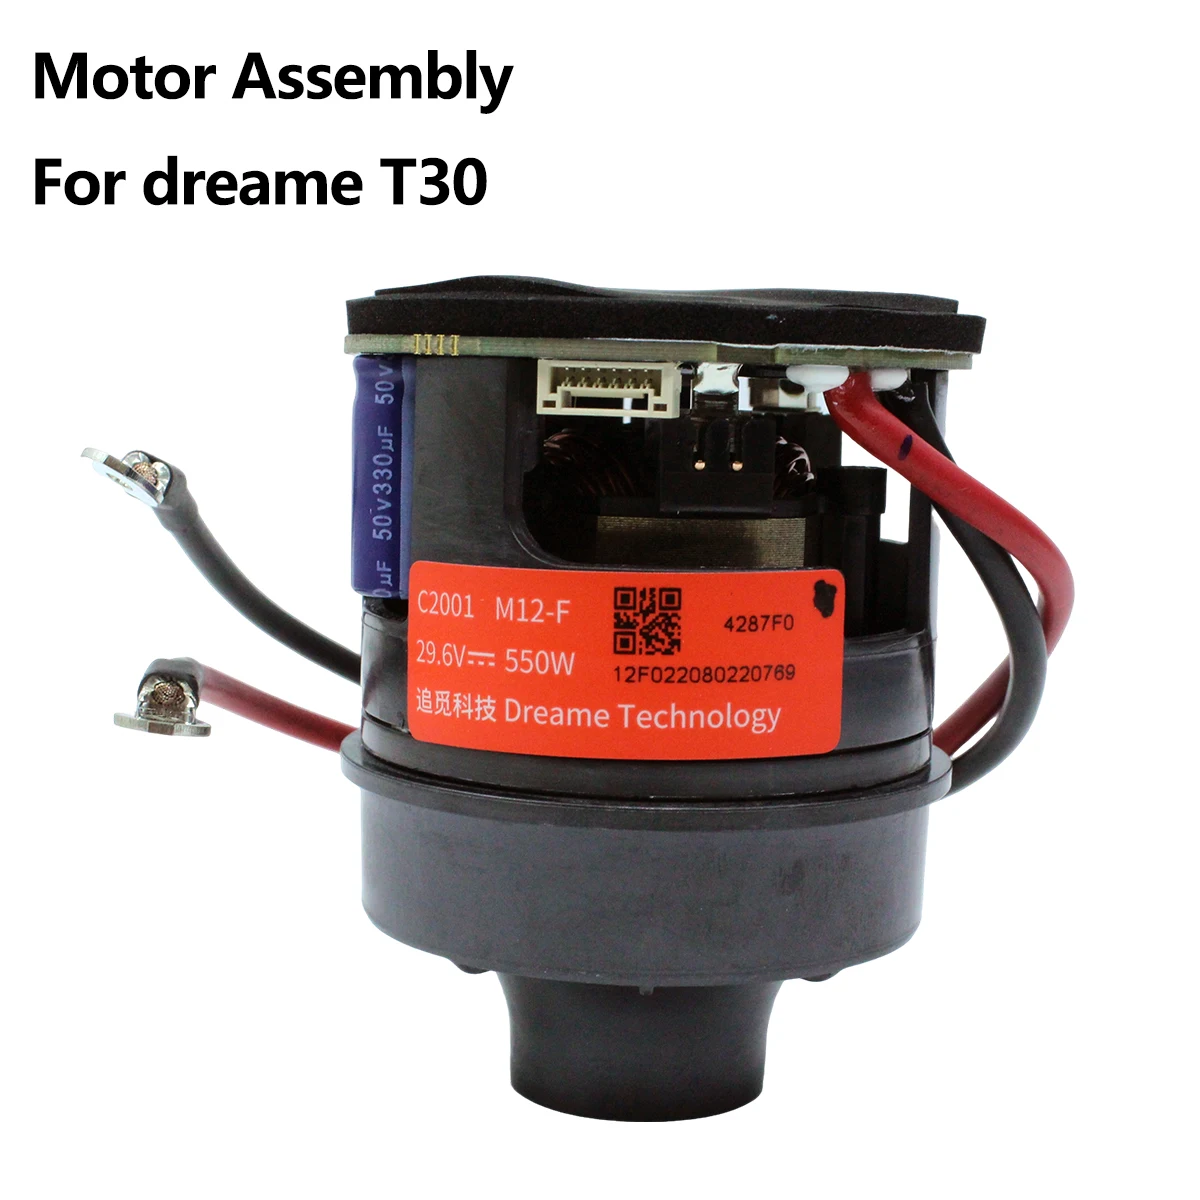 original-dreame-t30-handheld-vacuum-cleaner-motor-assembly-spare-parts-accessories-fan-module-m12-f